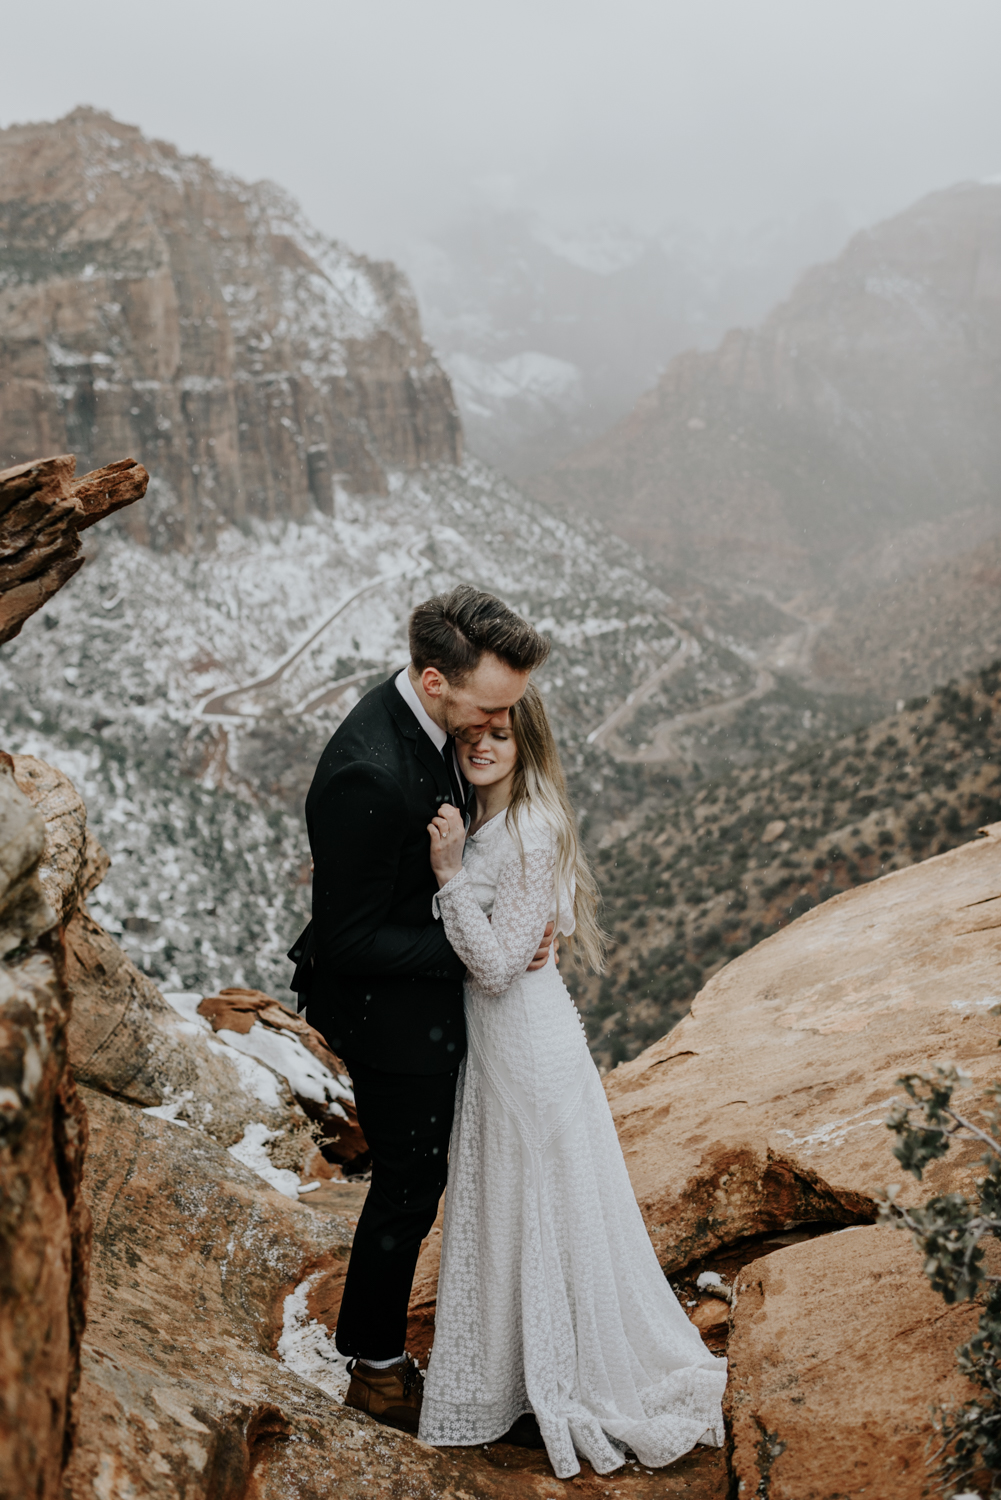 Outdoor lovers Eloping at Zion